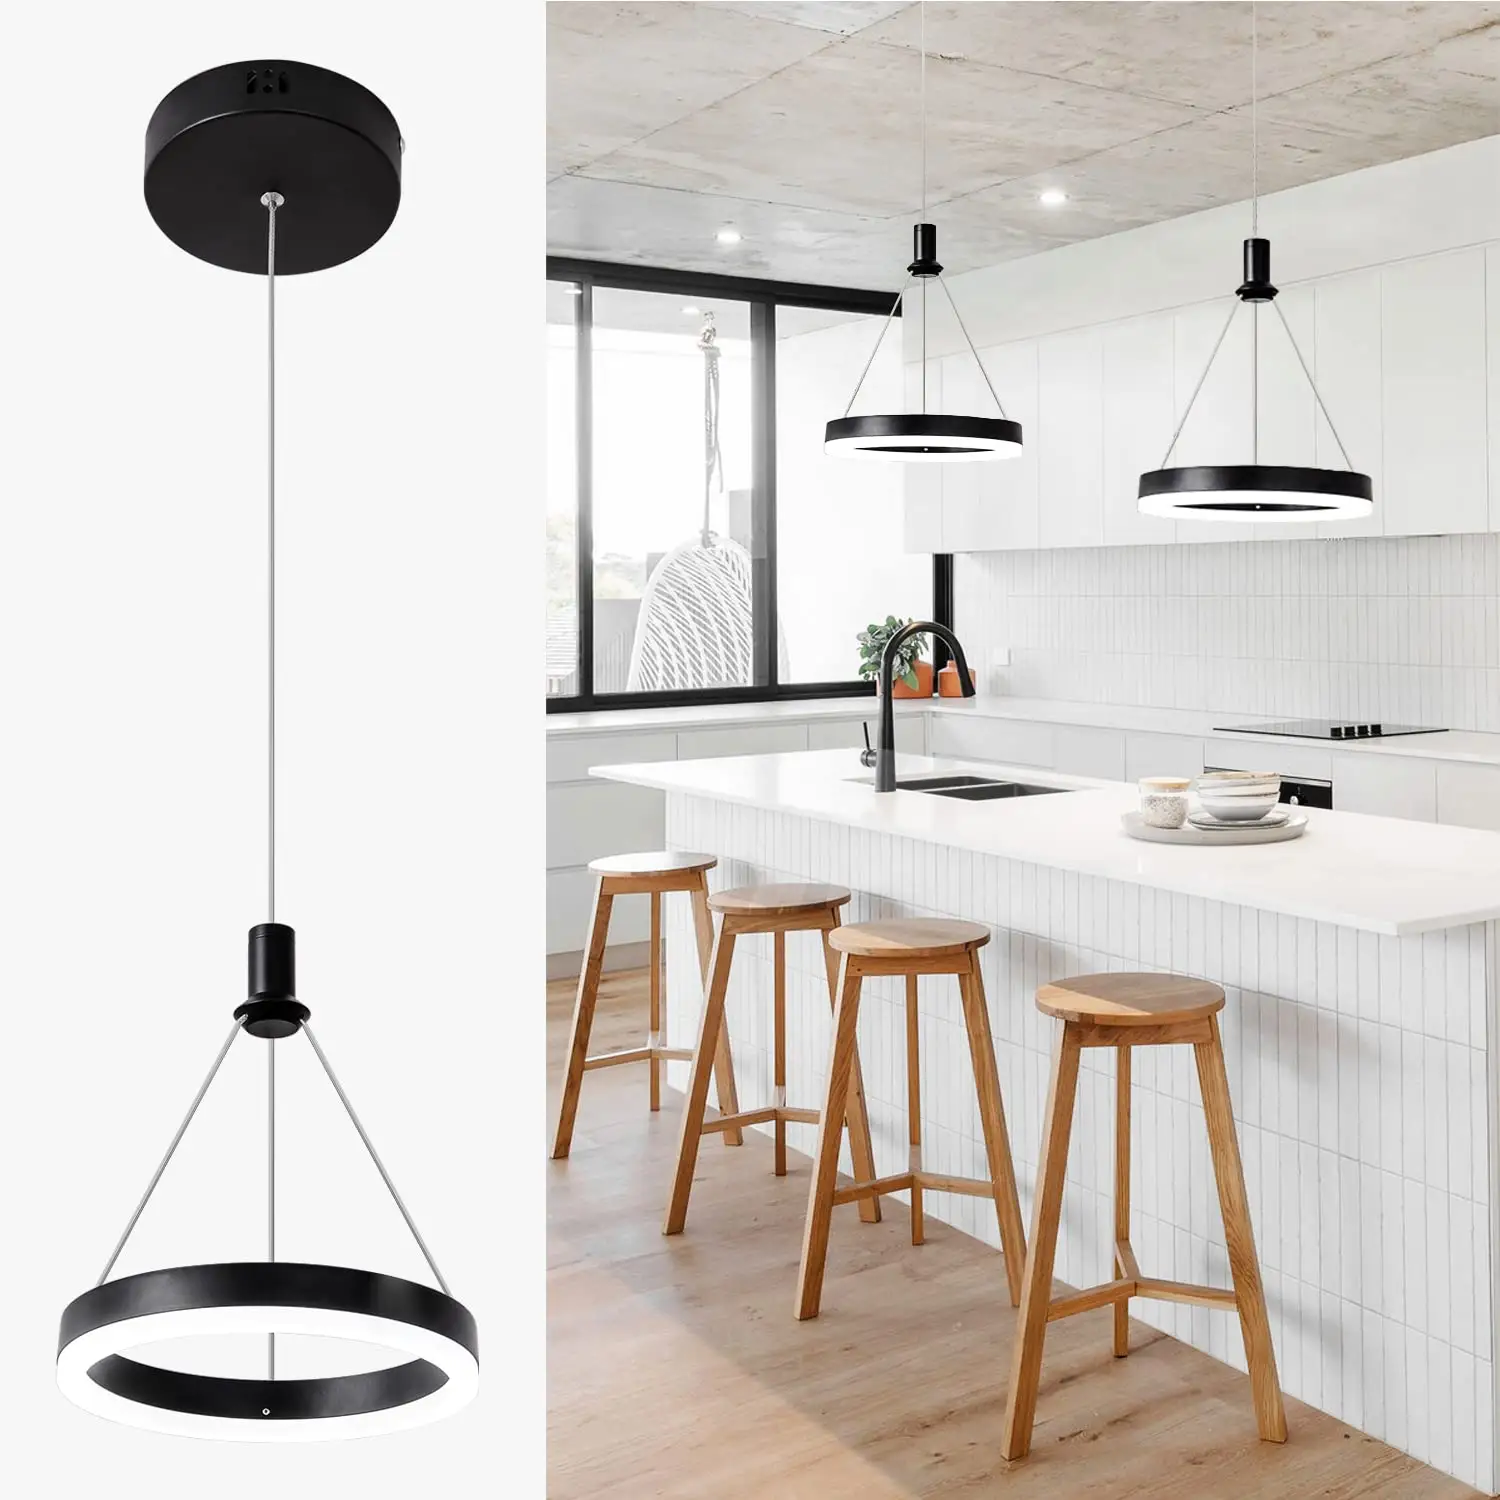 Cool light fixtures for kitchen